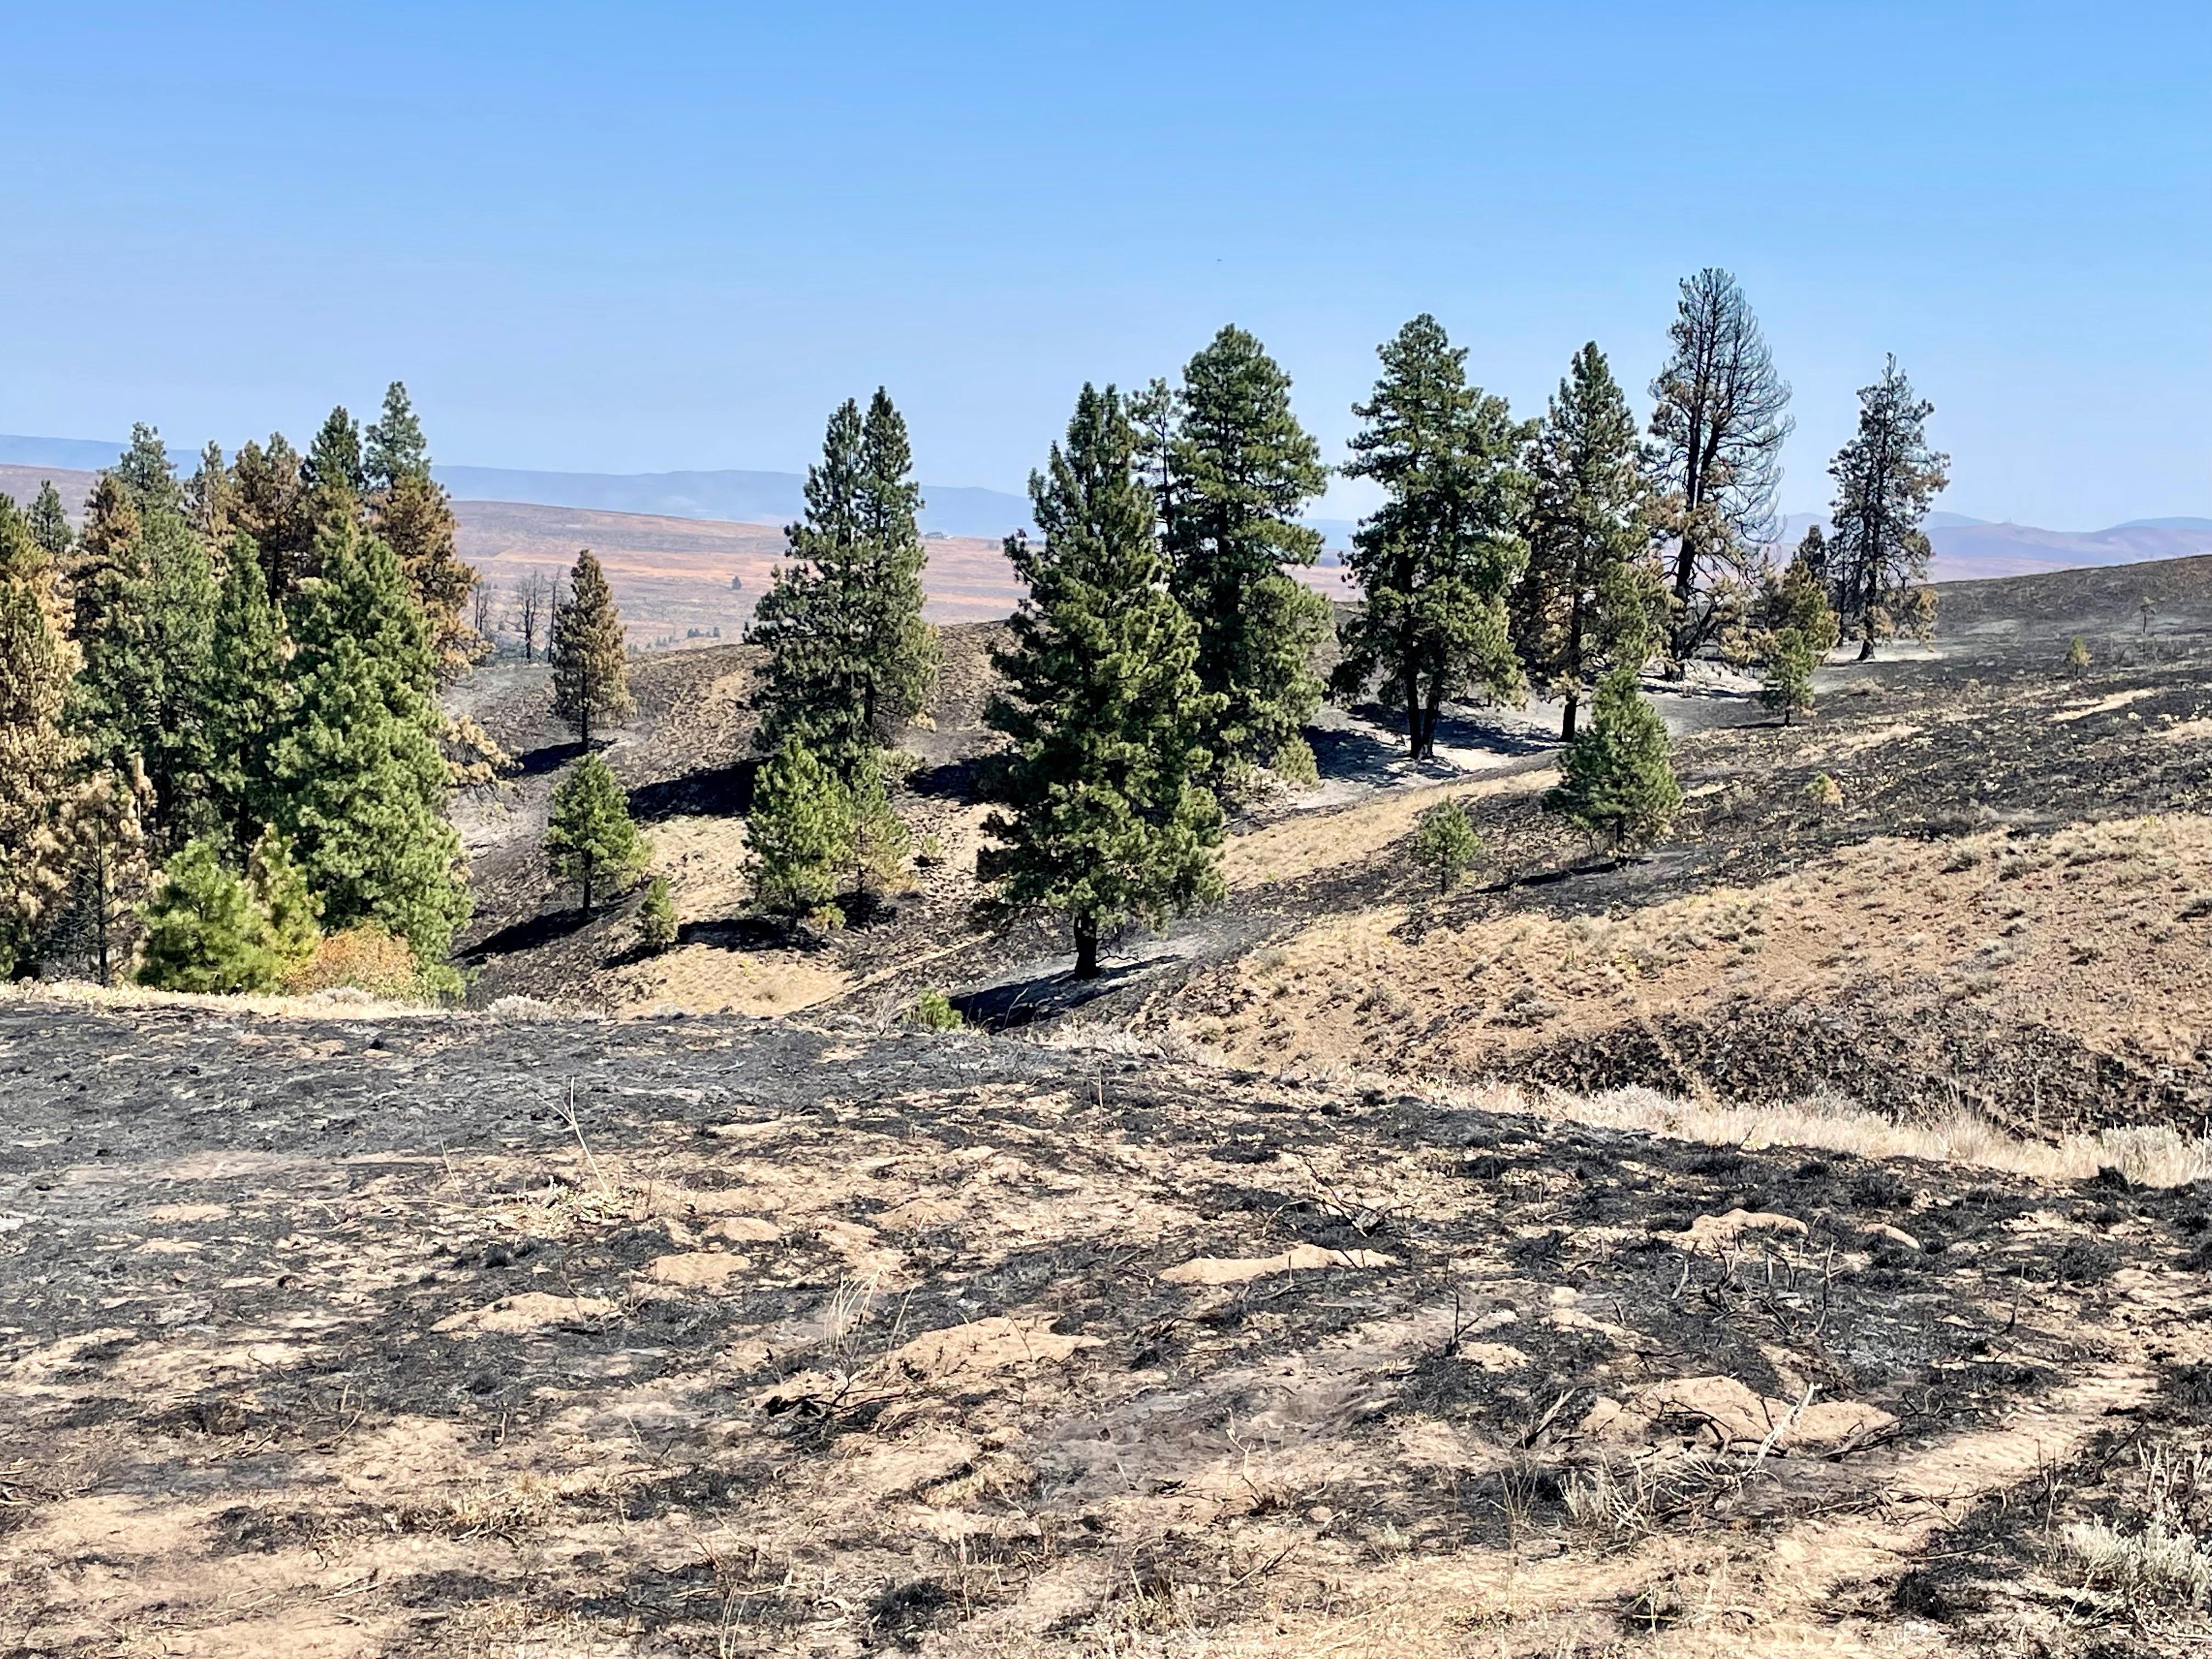 This area of the fire has cooled down and a charred black landscape remains. The fire moved quickly through the grass and ground fuels and continued to push into the Ponderosa pine stand.